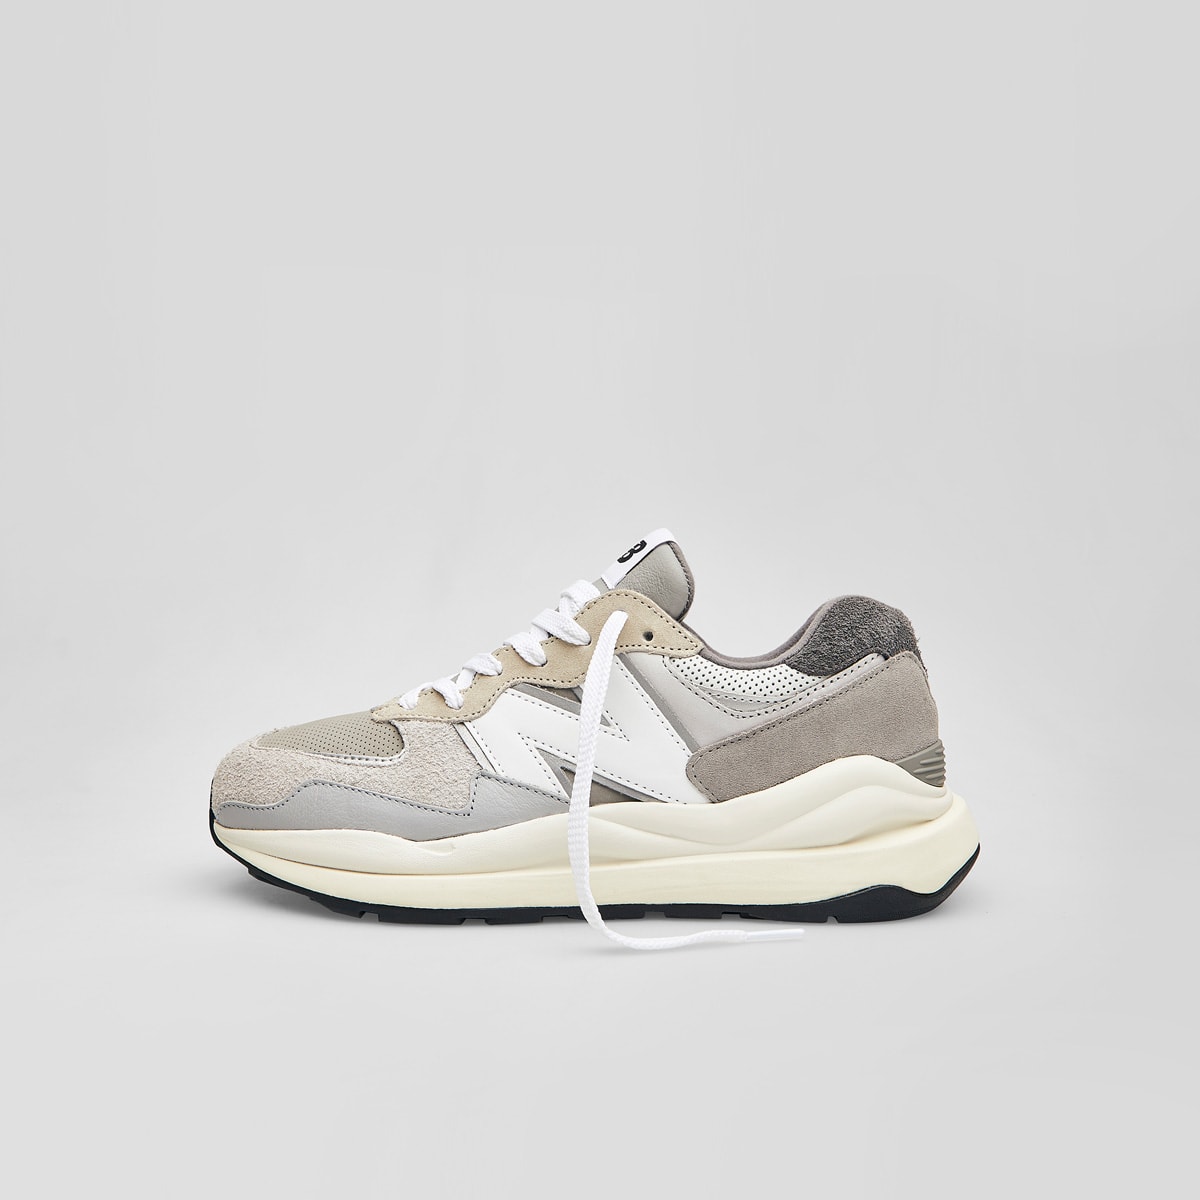 New Balance M5740TA 'Grey Day' (Grey & White) | END. Launches